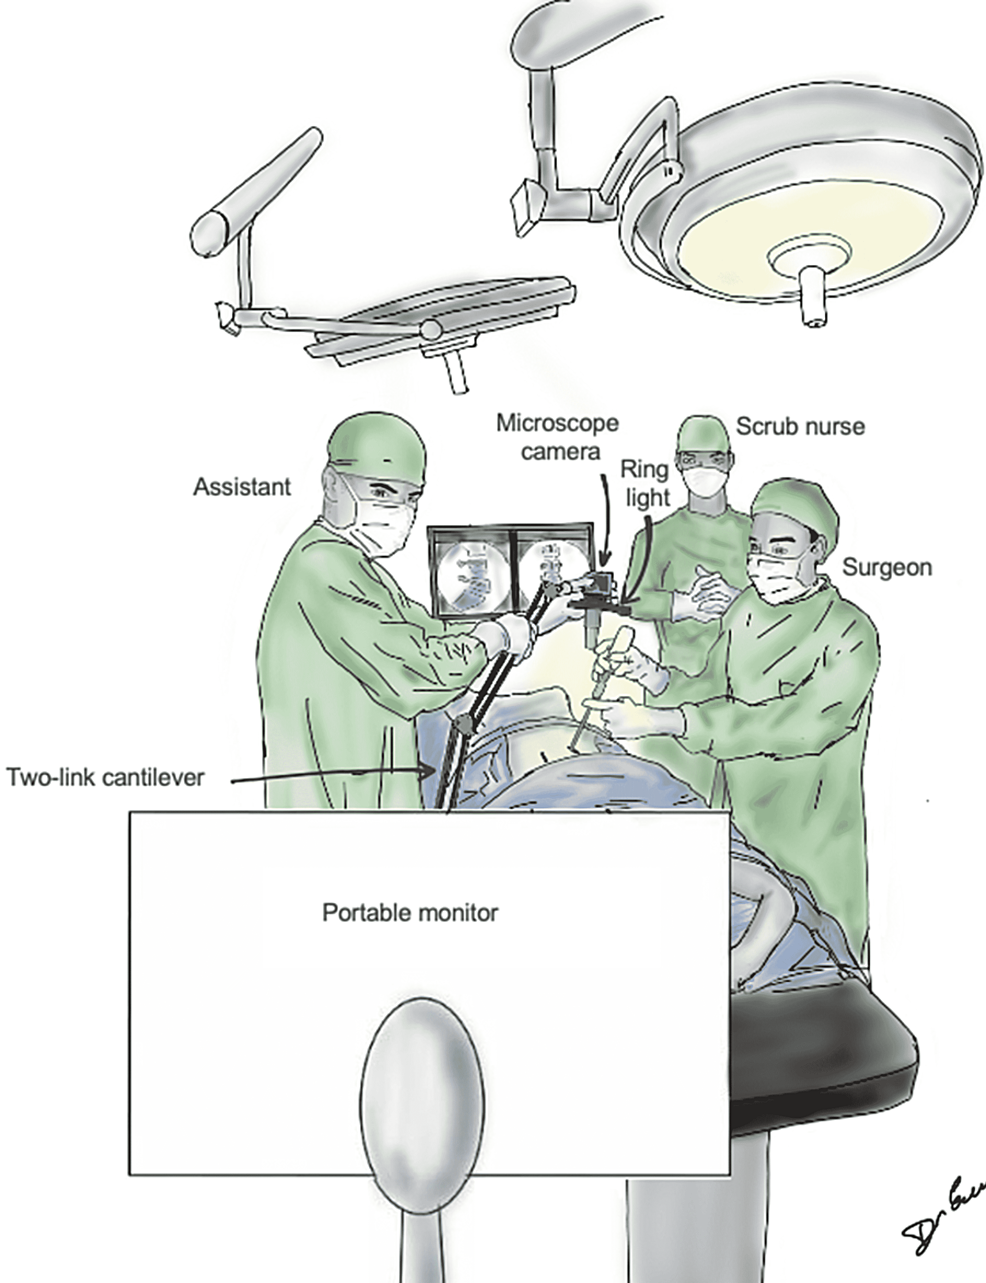 Graphical-illustration-of-the-operating-room-setup-during-the-exoscope-assisted-phase-of-the-surgery.